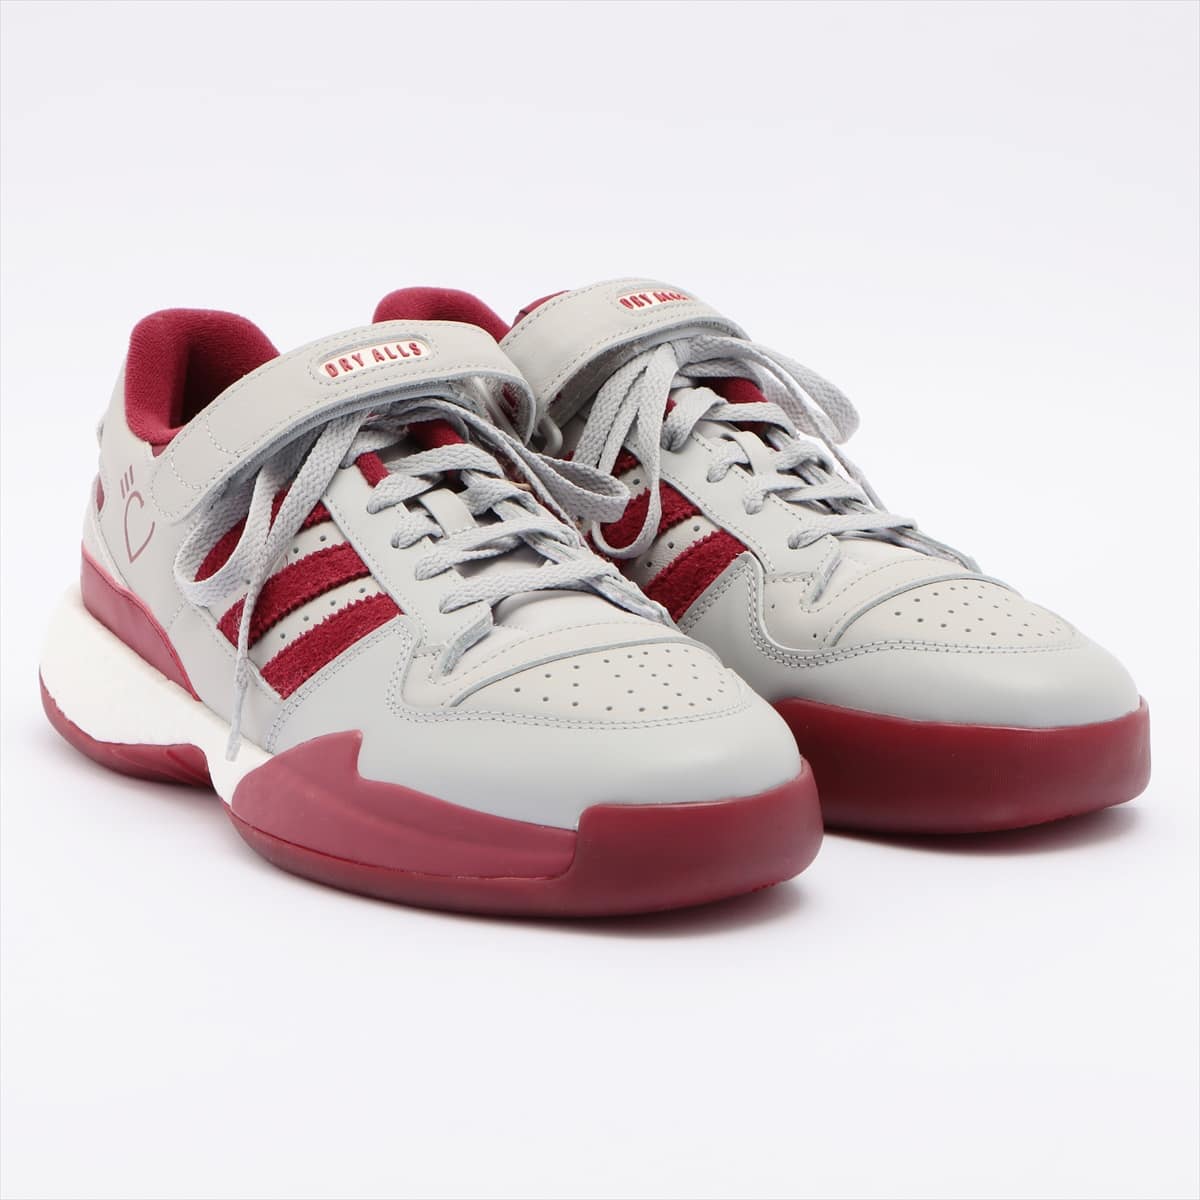 adidas x Human Made Leather Sneakers 27.5cm Men's Gray x red CONSORTIUM FORUM LOW S42977